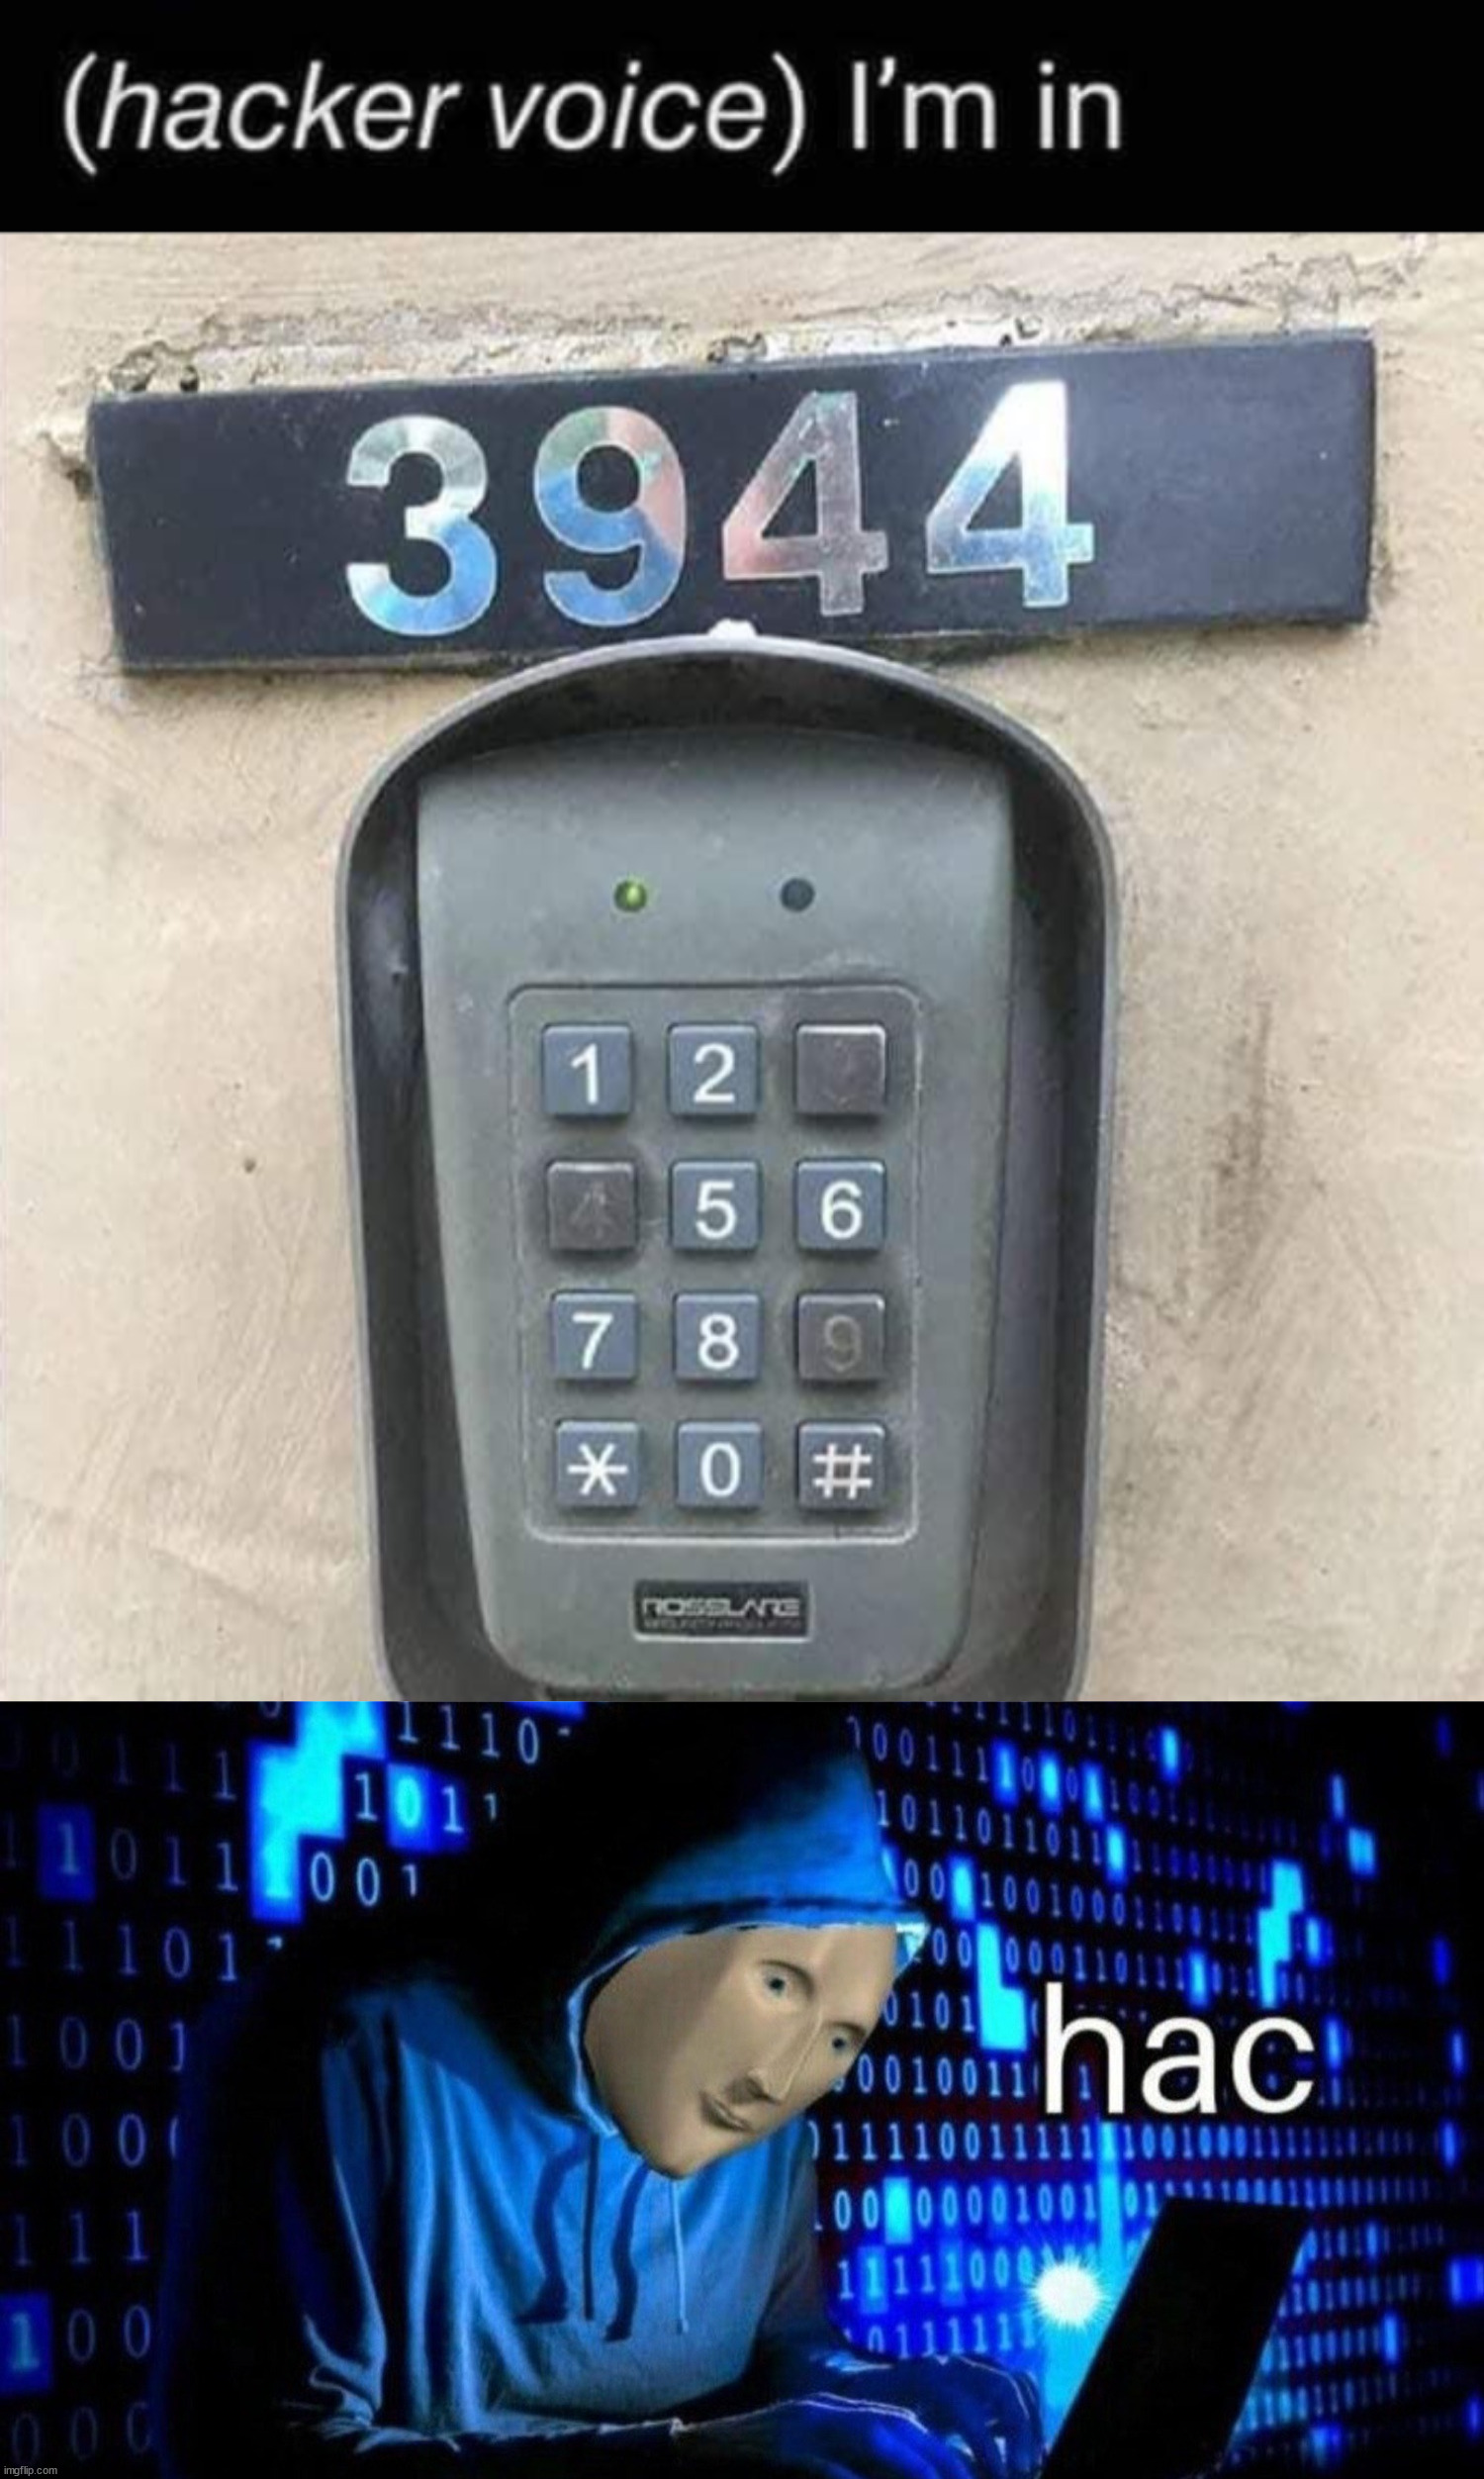 Wonder what the code is? | image tagged in meme man hac,derpy,hackers,code | made w/ Imgflip meme maker